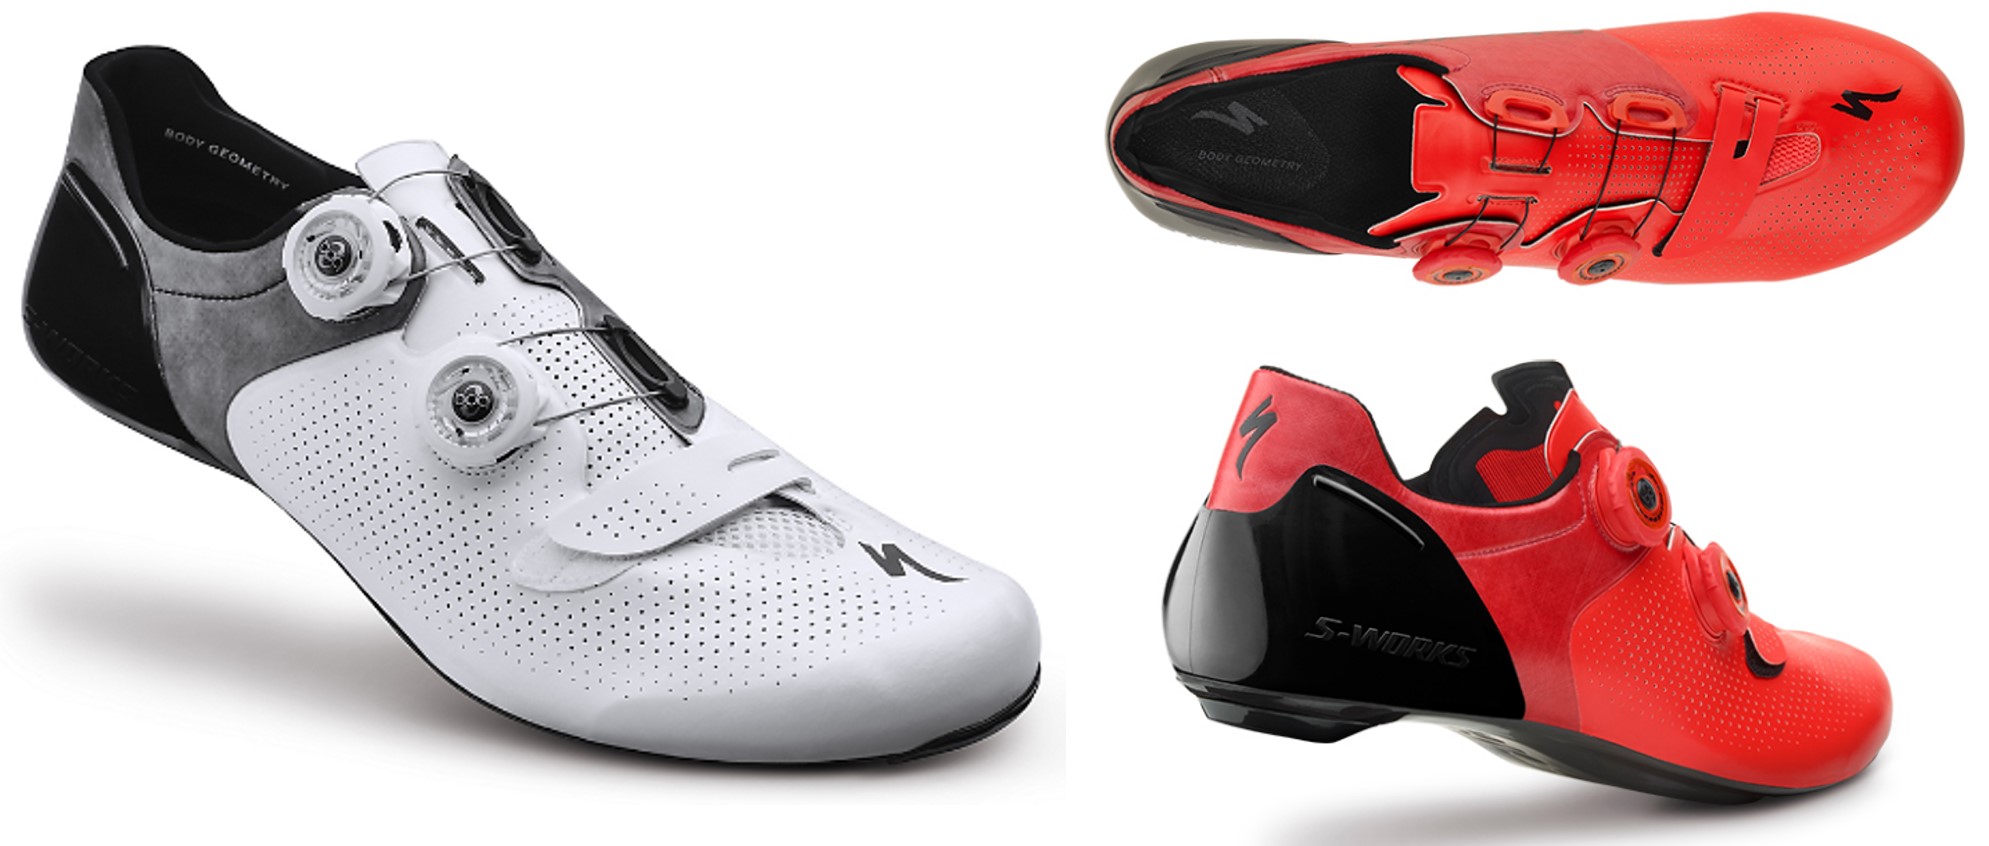 Shimano S-Works 6 Road Cycling Shoes